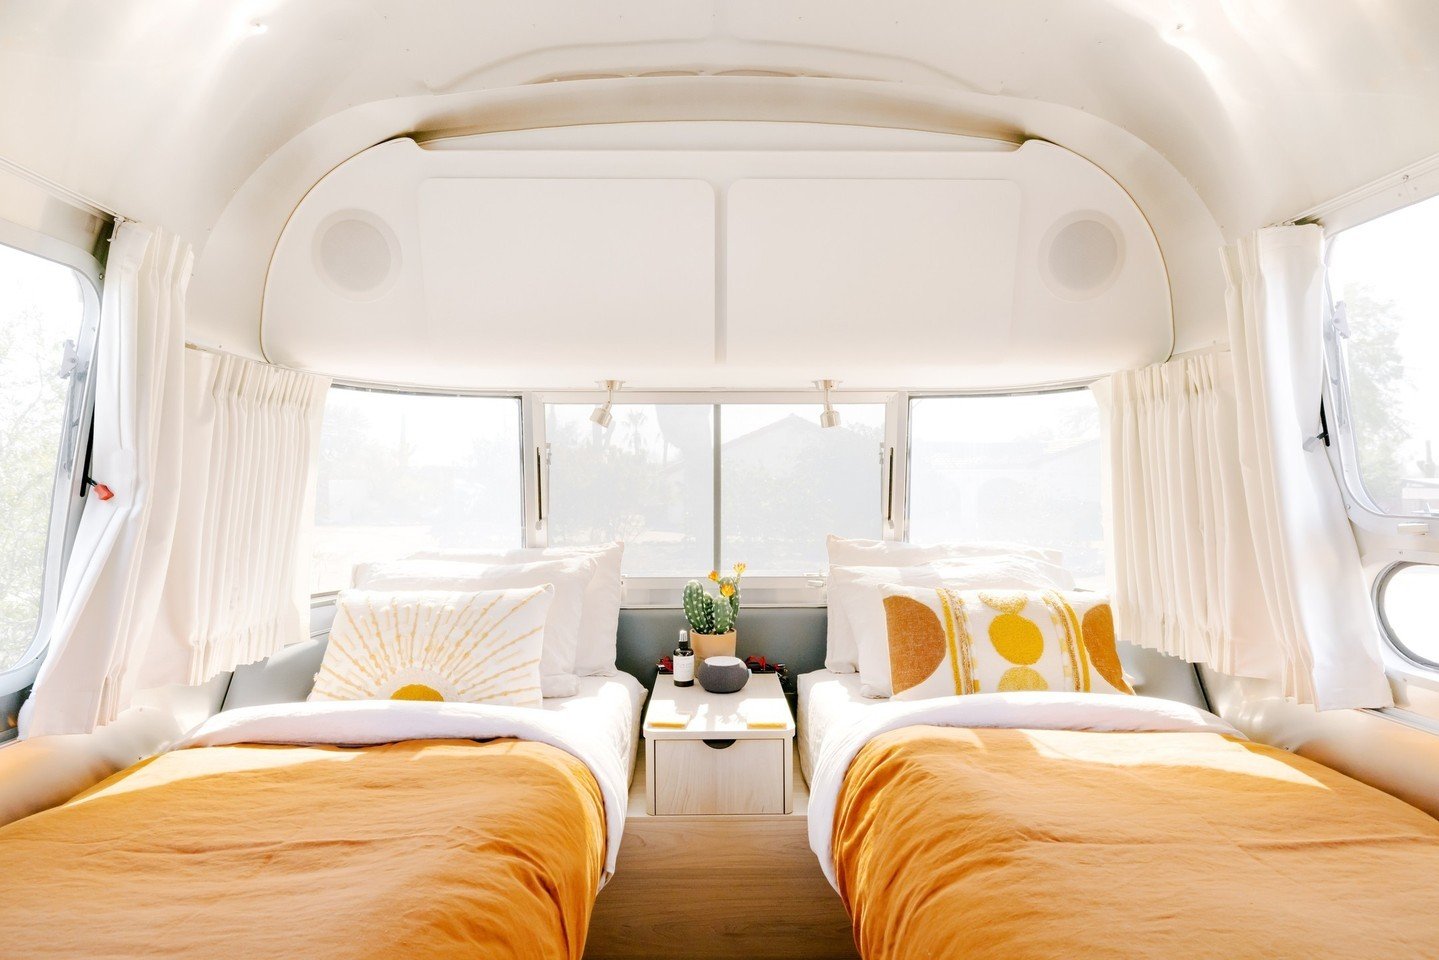 Oasis Airstream is about to close for the summer, but we've still got availability for UofA Graduation if you need a cute place to stay! If you've always wanted to stay in an iconic (and gorgeous) Airstream, the calendar is open for fall and winter b